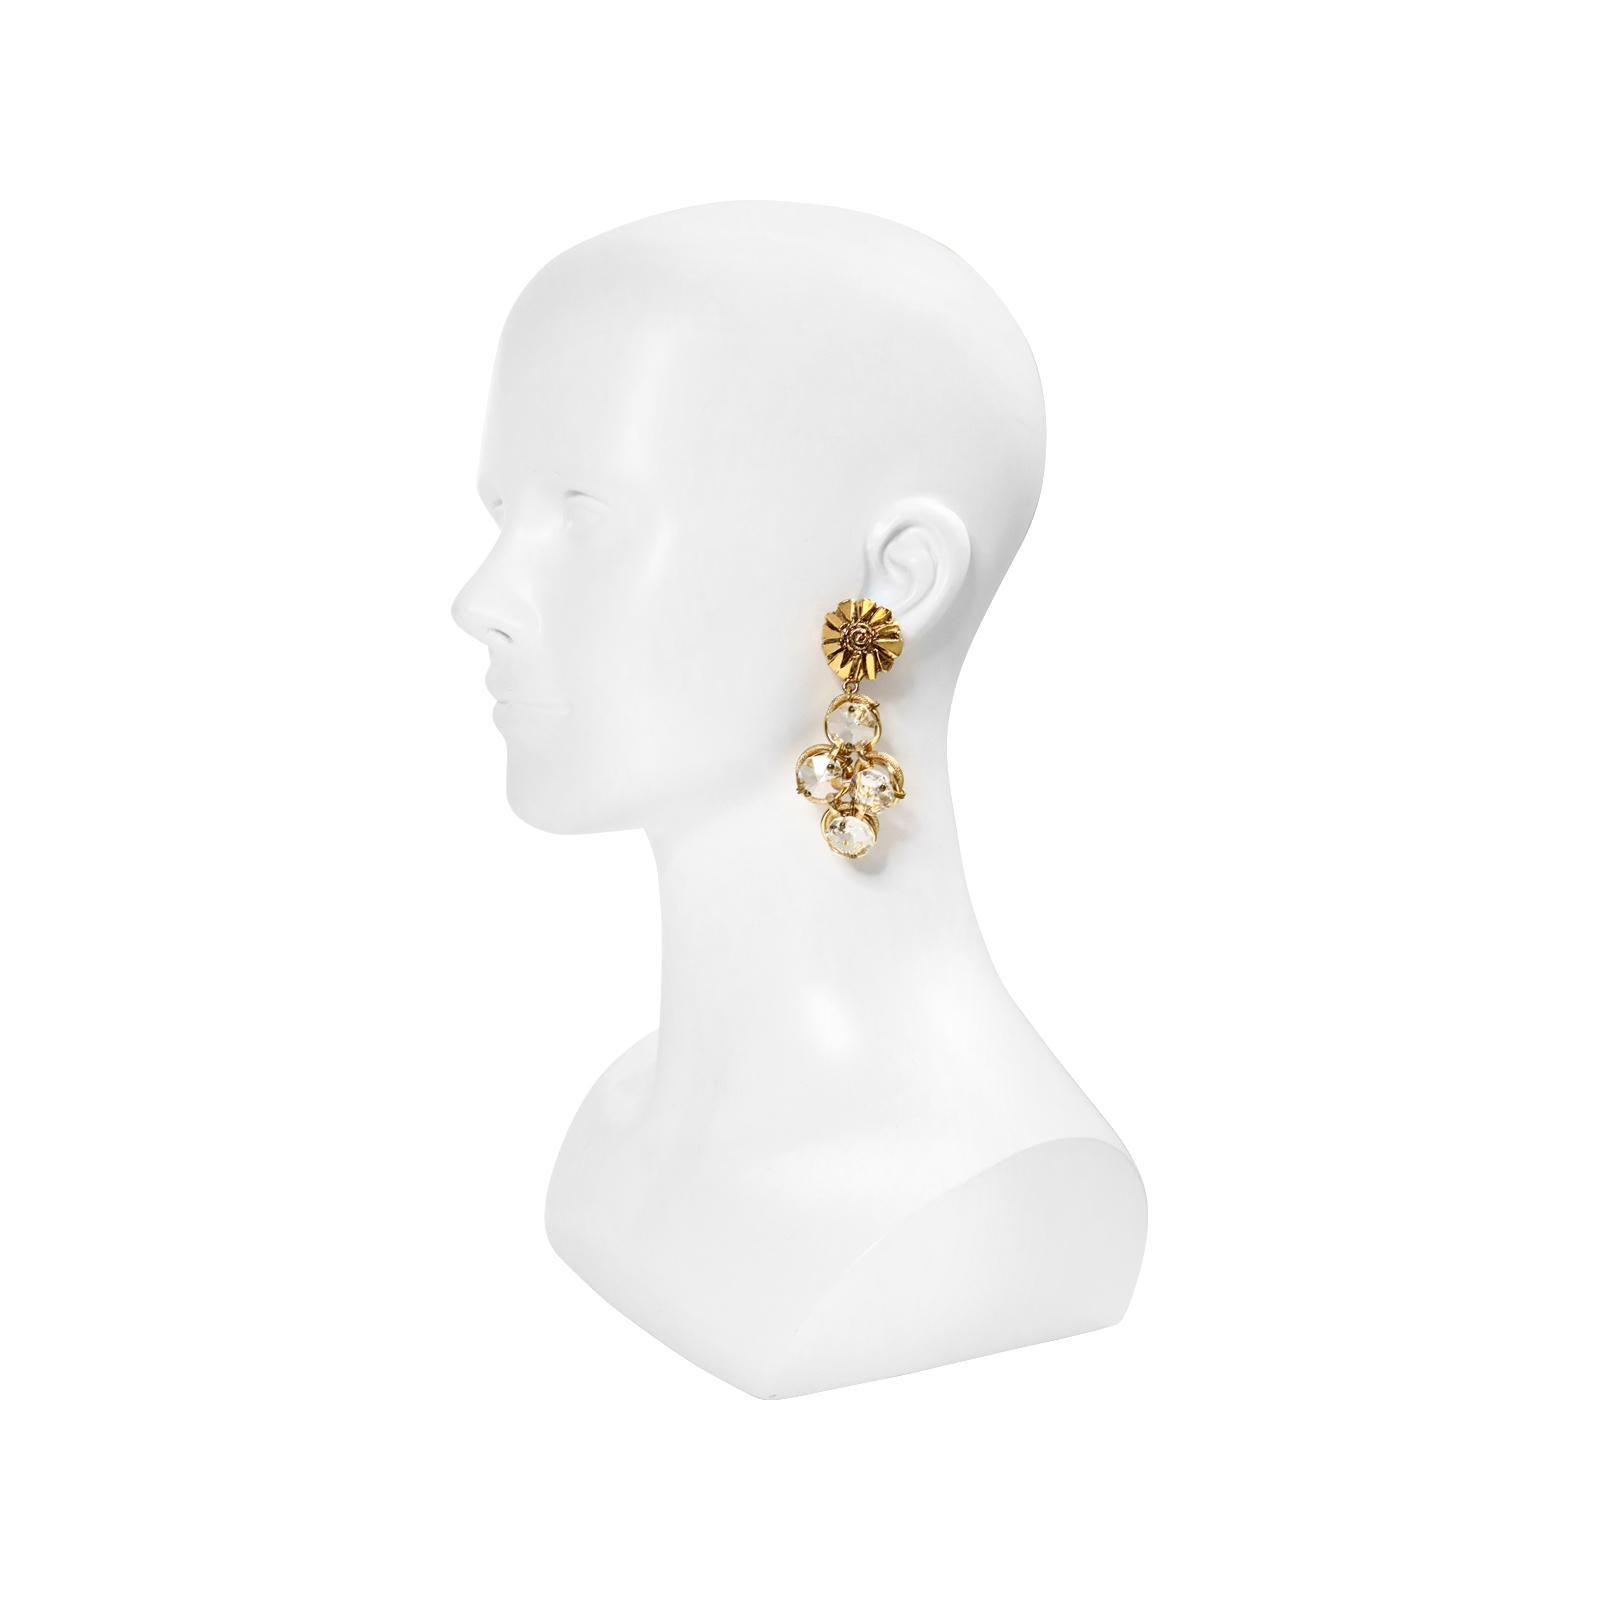 Vintage Poggi Paris Gold Tone with Large Crystals Dangling Earrings, circa 1990s For Sale 1